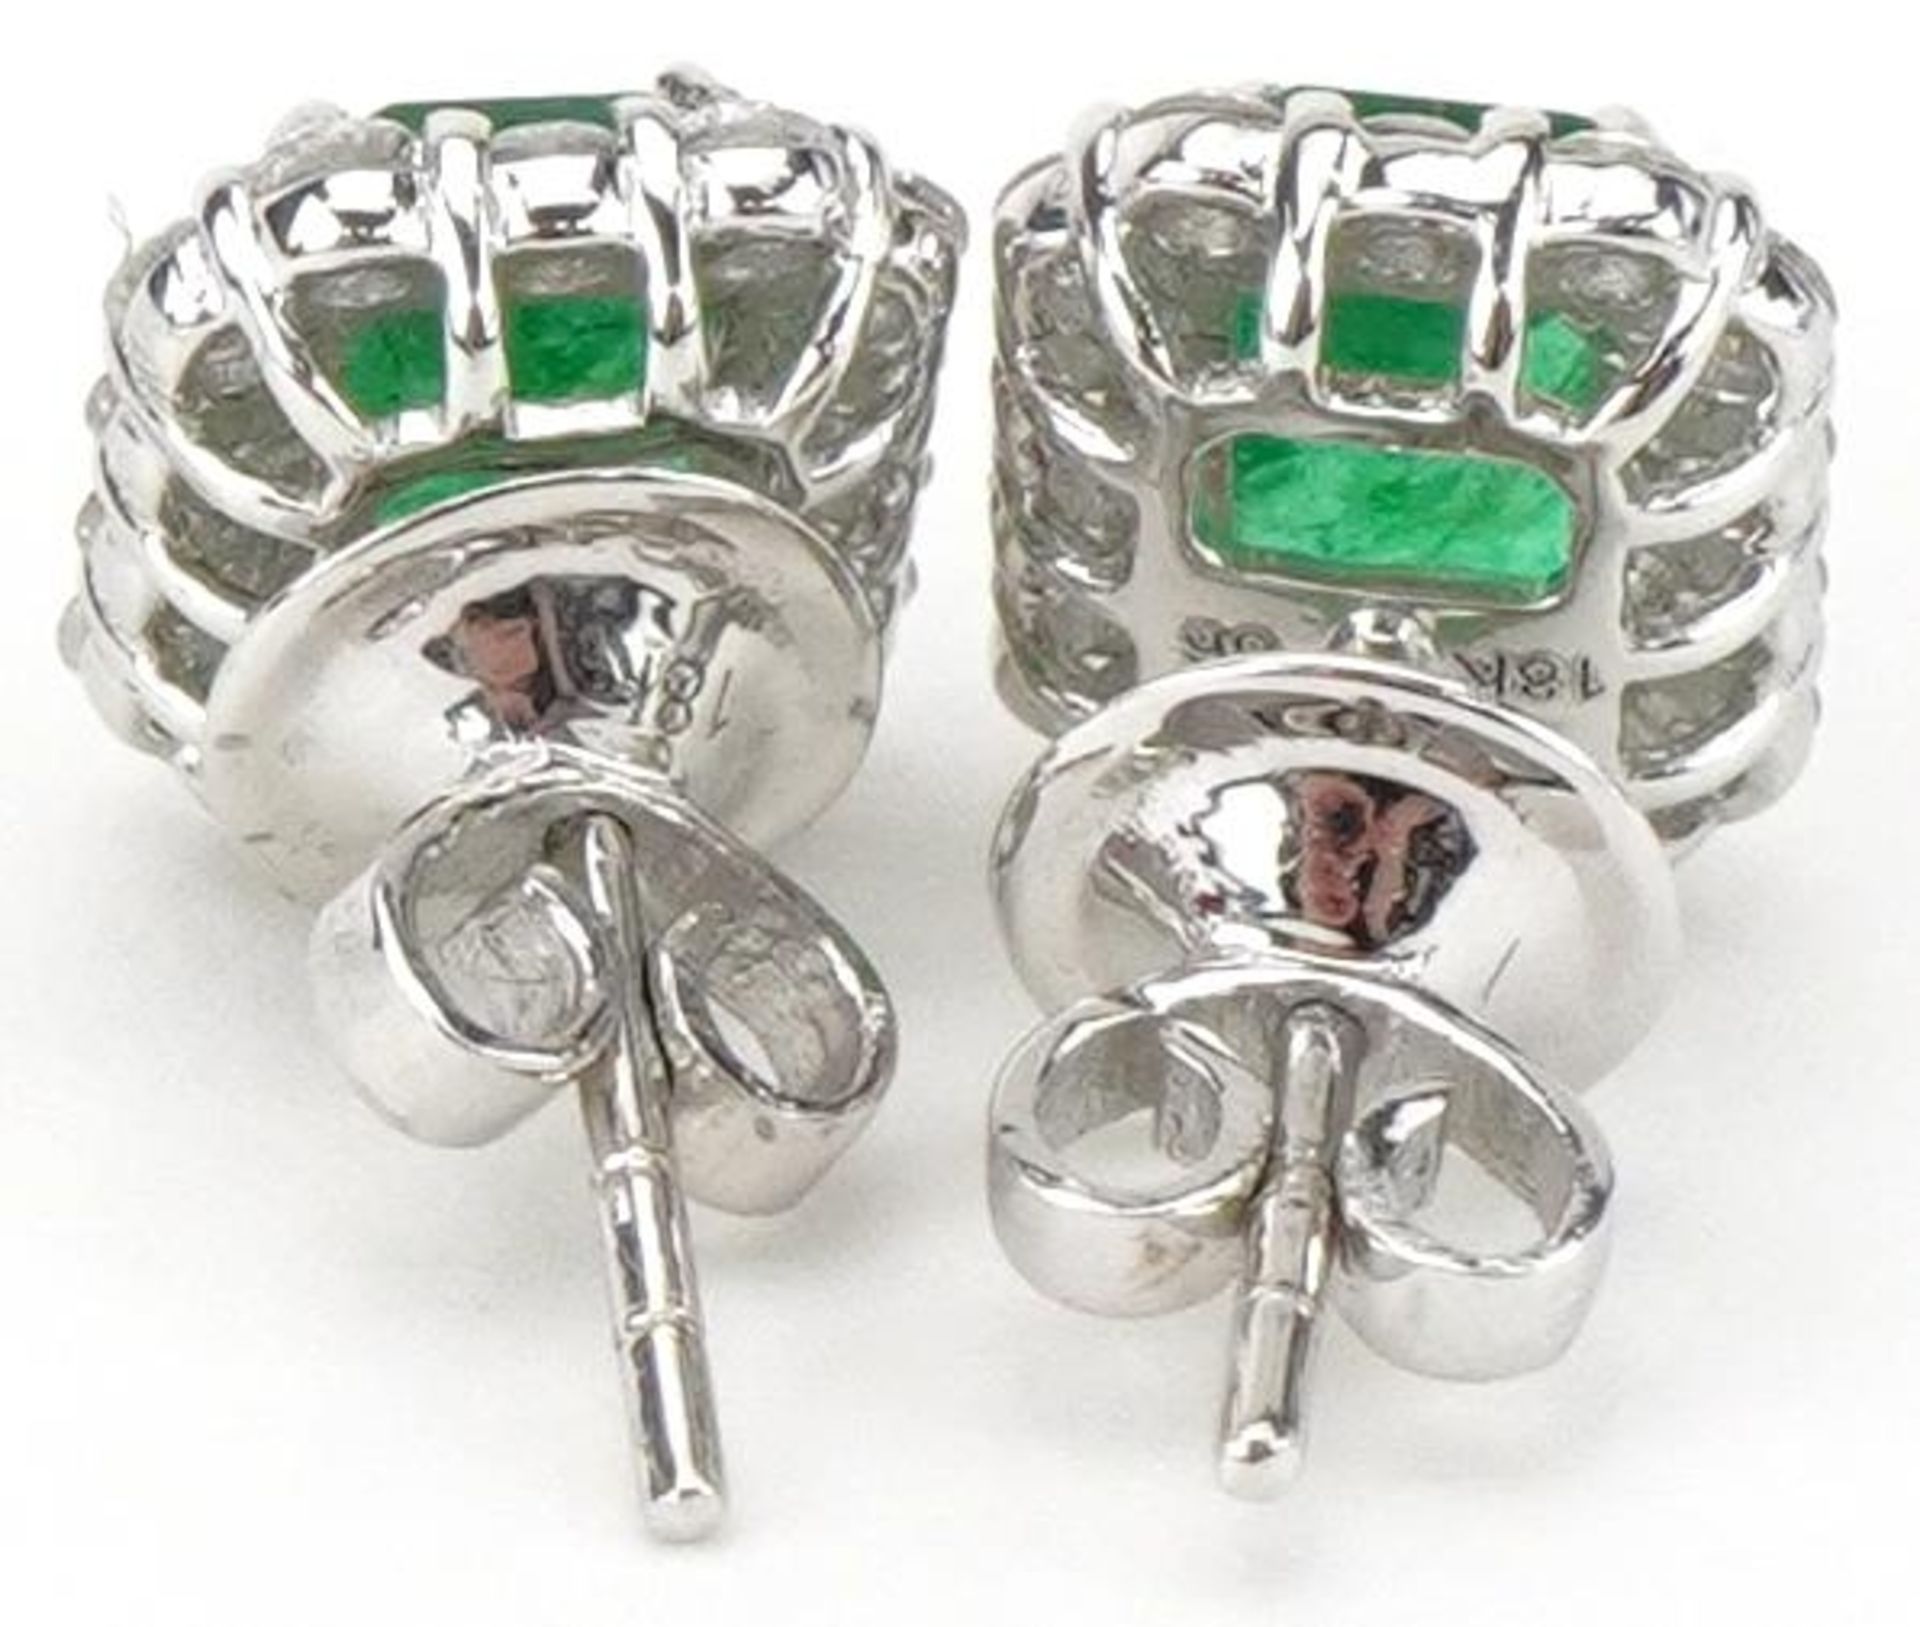 Pair of 18ct white gold emerald and diamond stud earrings, total diamond weight approximately 0.70 - Image 2 of 3